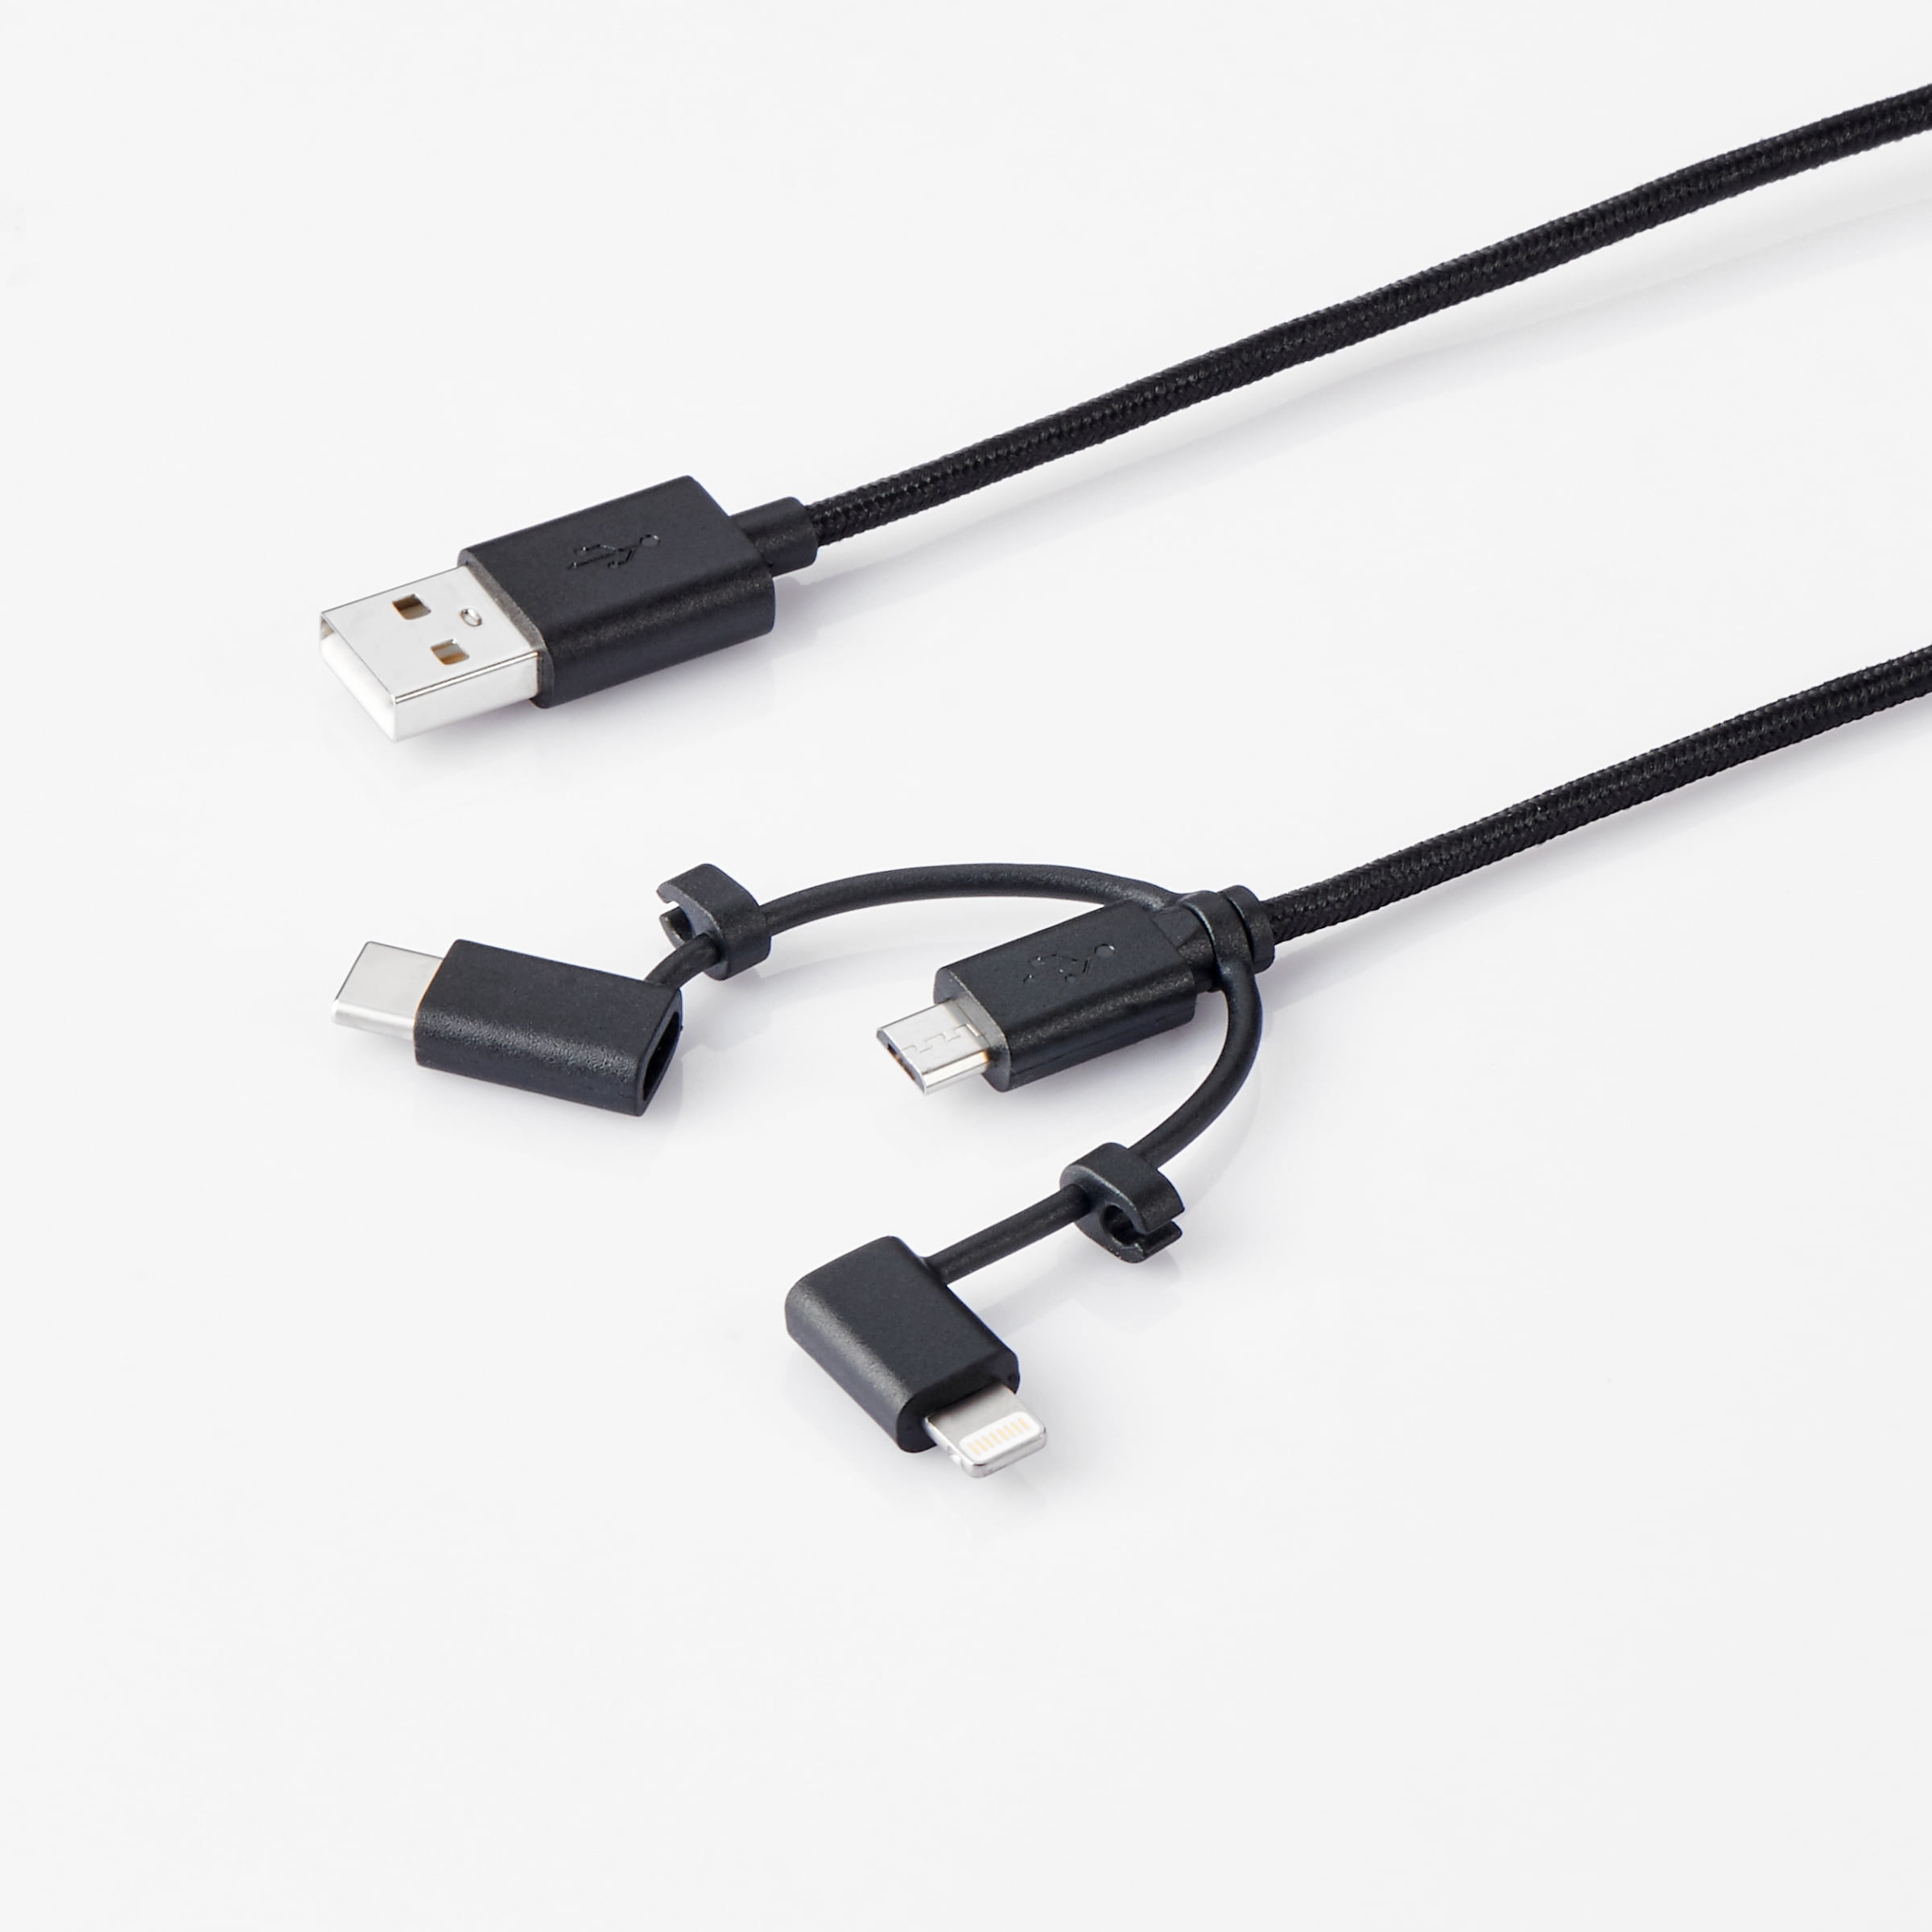 Round USB Data Cable Charging Cable Can Be Charged and Data Transmission Synchronous Fast Charging Cable-View of Short-Haired Brown and White Cat 